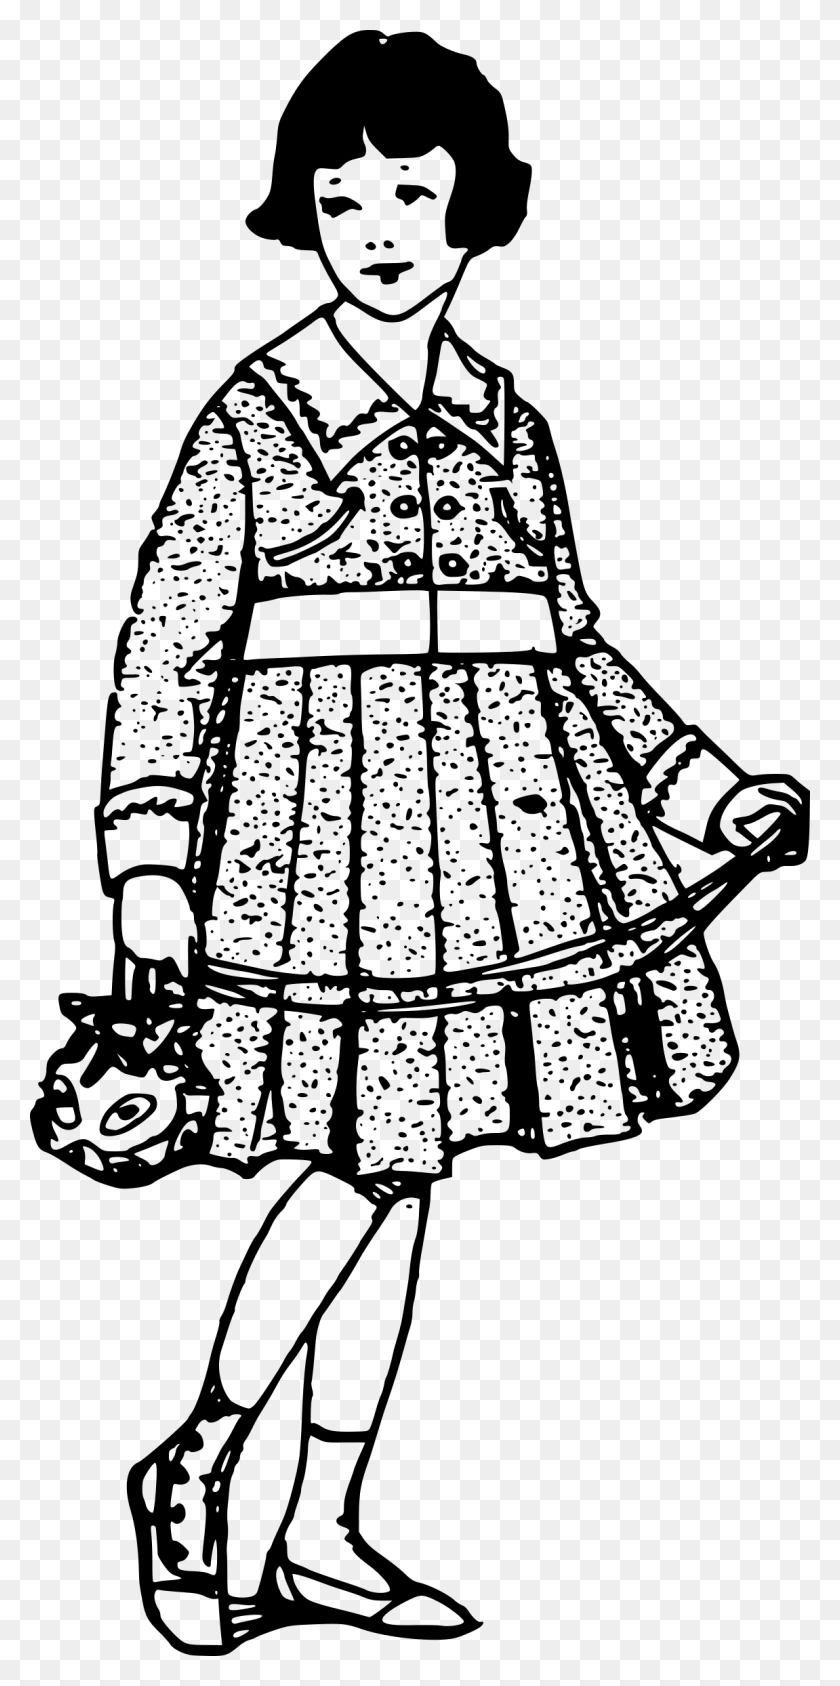 1151x2400 This Free Icons Design Of Young Girl In A Dress Girl In Dress Clipart Blanco Y Negro, Grey, World Of Warcraft Hd Png Descargar